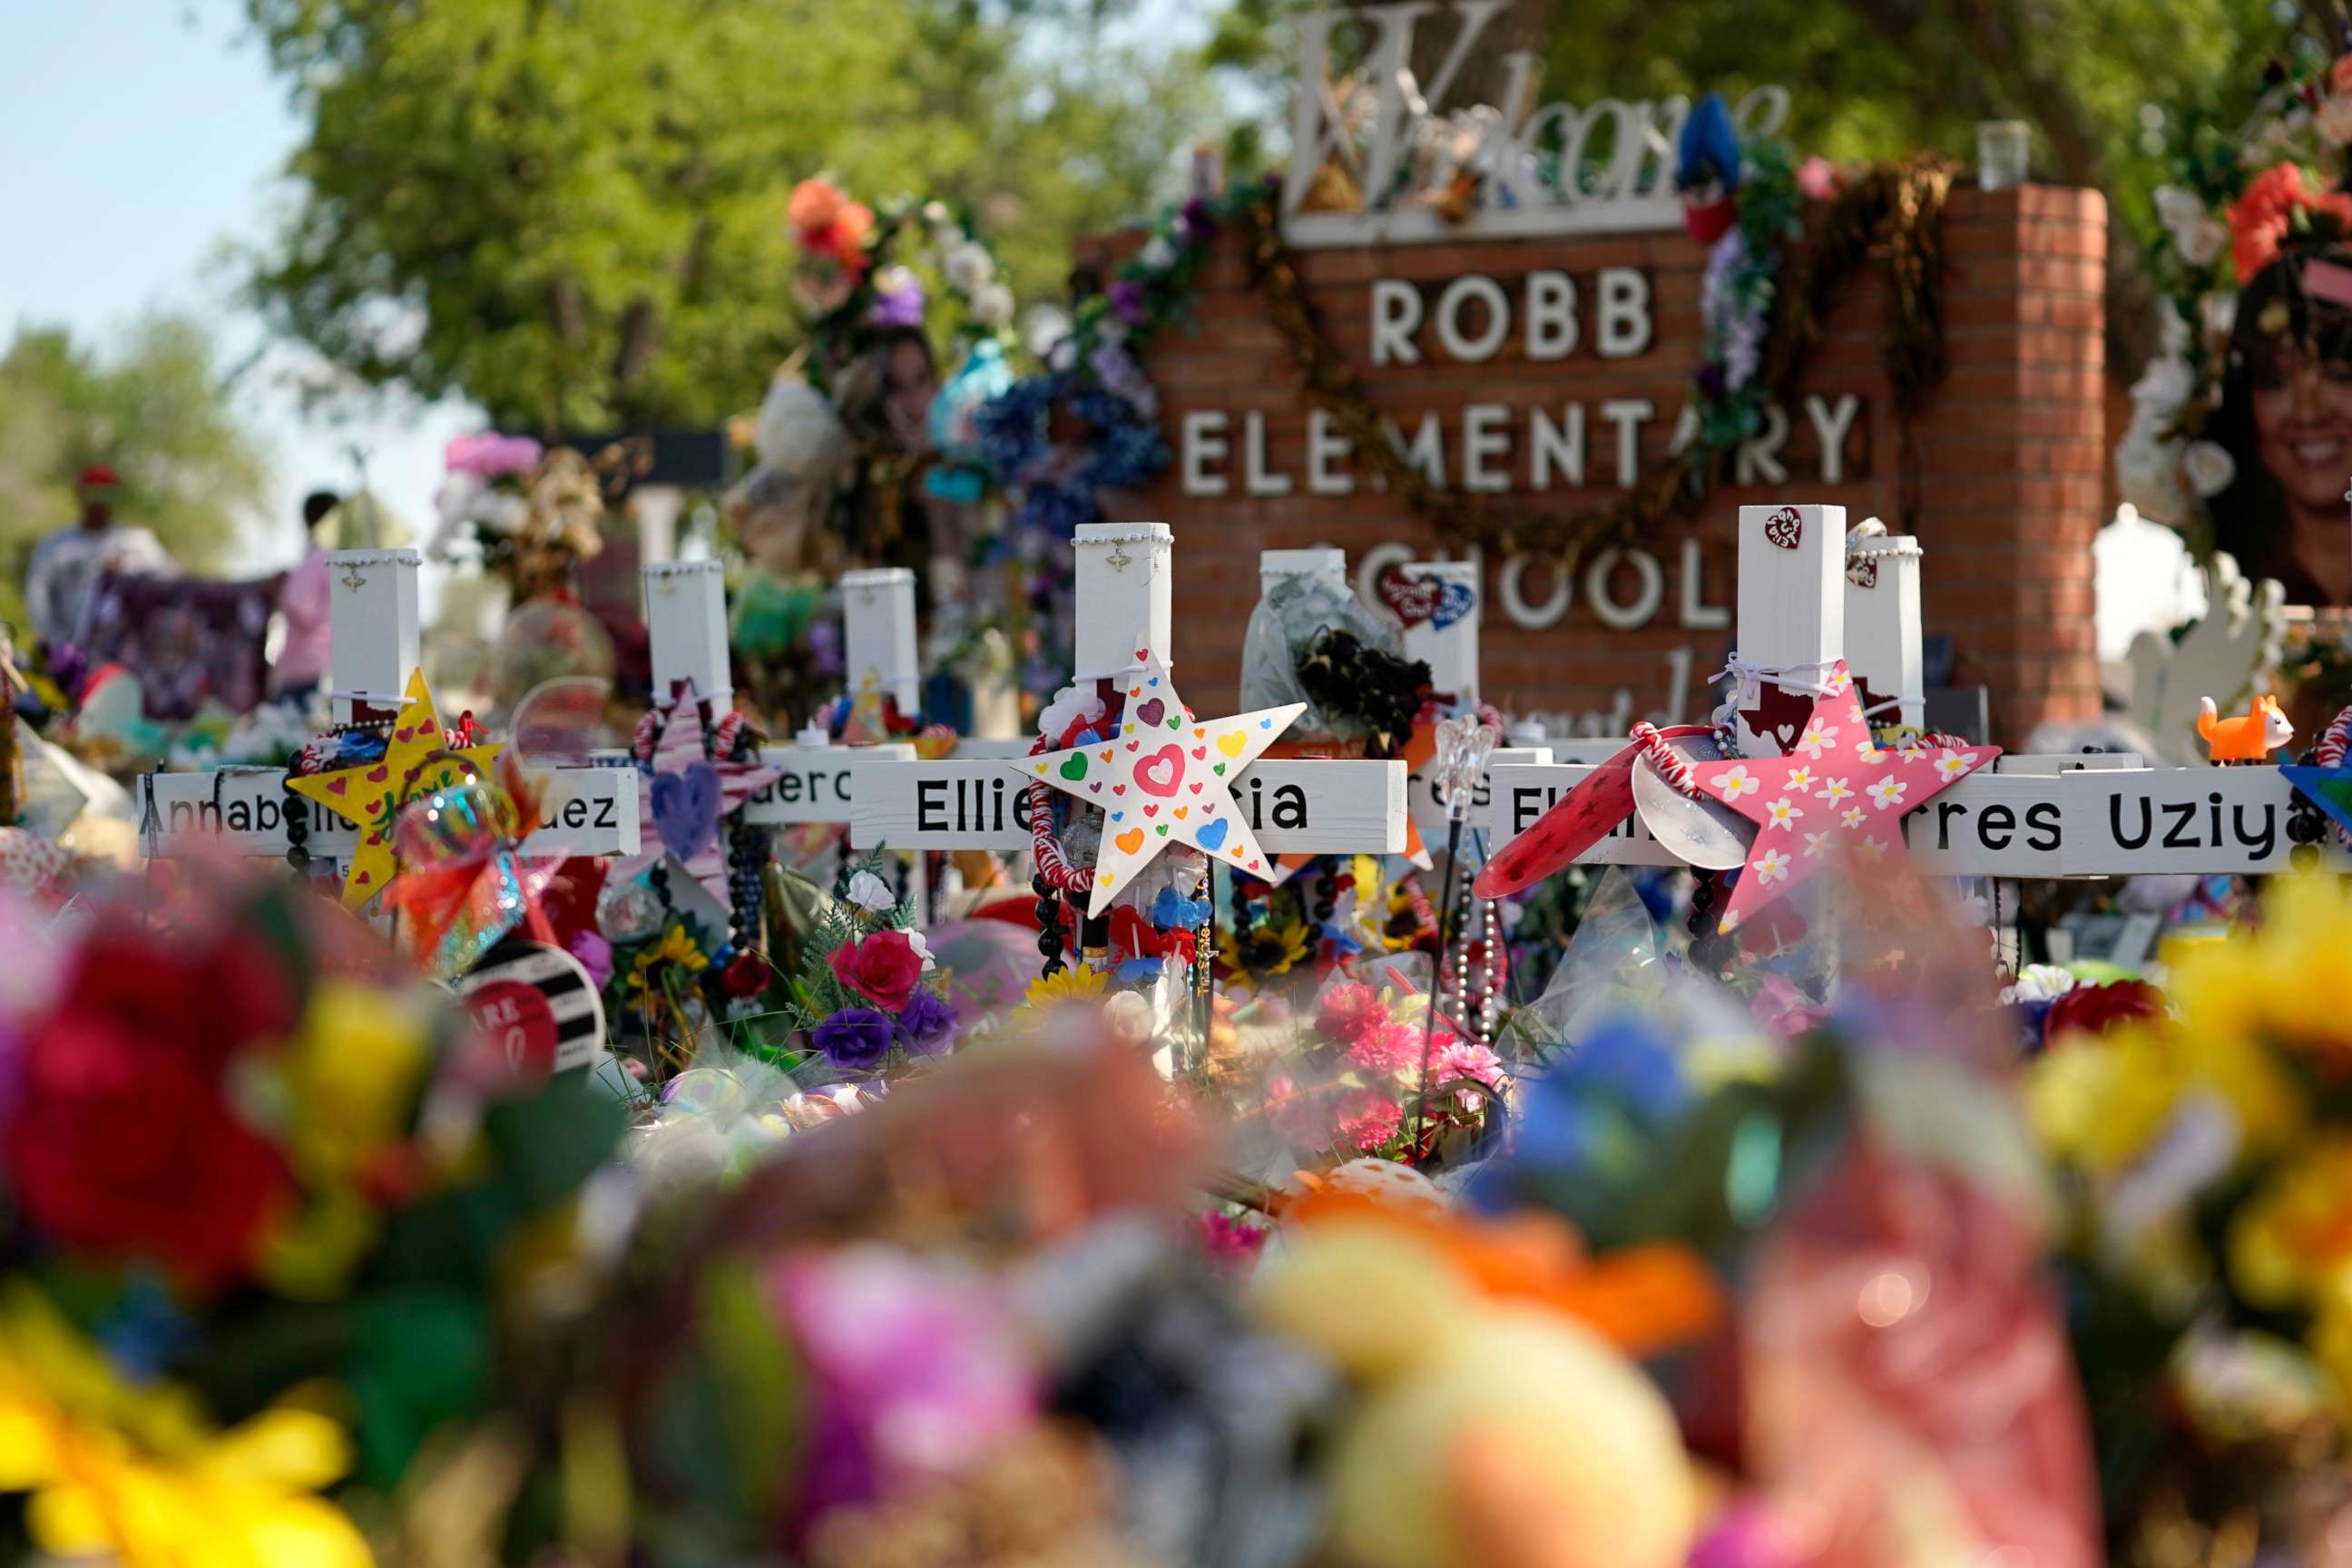 PHOTO: Crosses, flowers and other memorabilia form a make-shift memorial for the victims of the shootings at Robb Elementary school in Uvalde, Texas, July 10, 2022.